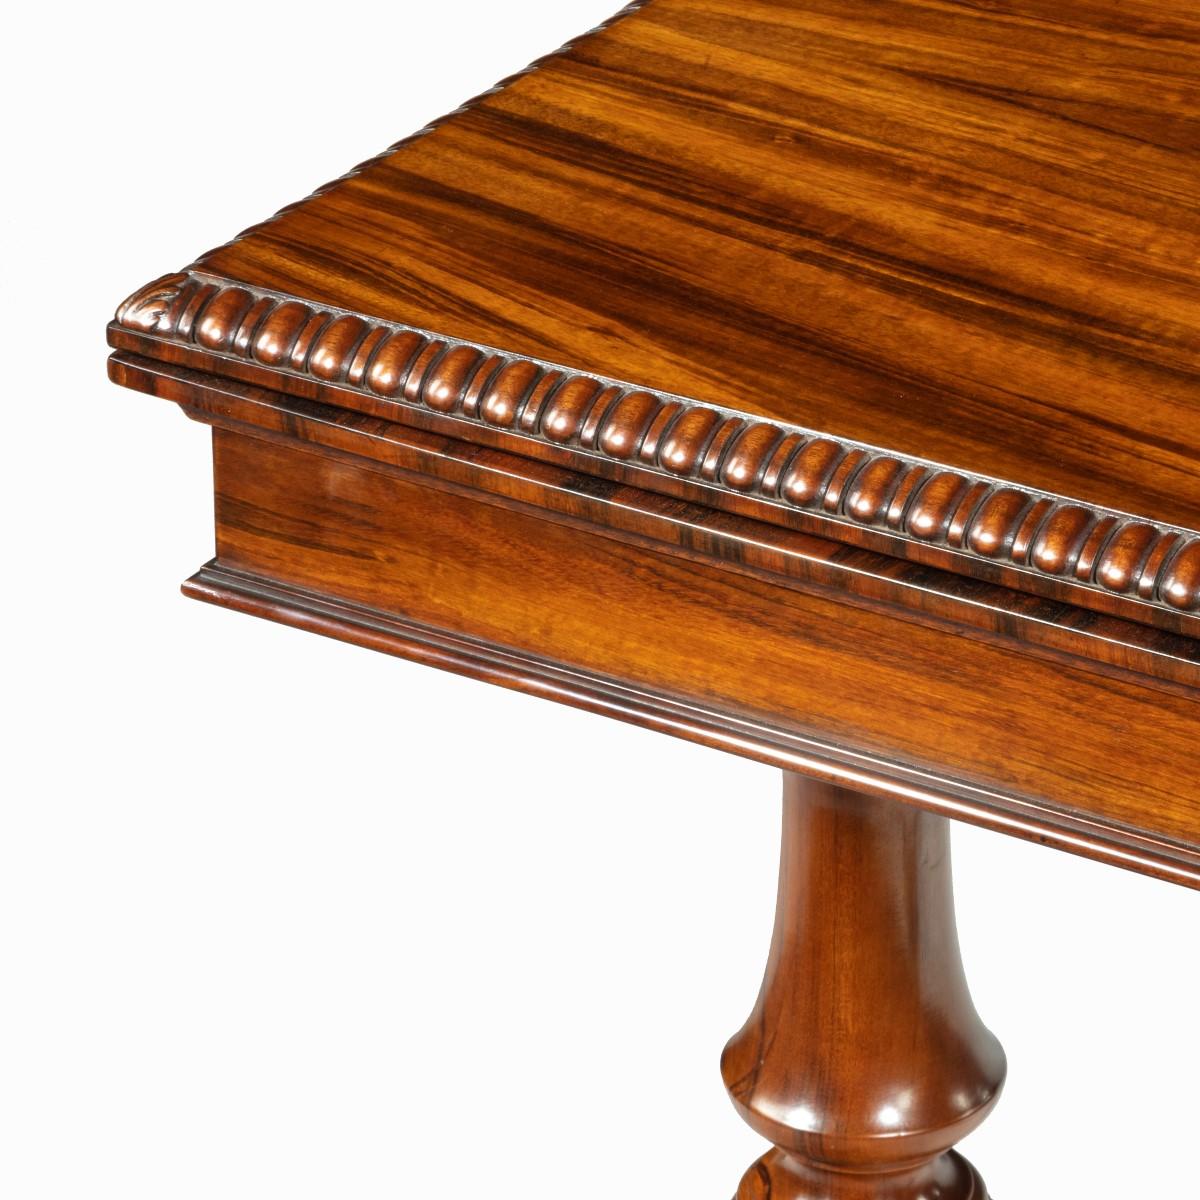 19th Century Early Victorian Goncalo Alves Card Table Attributed to Gillows For Sale